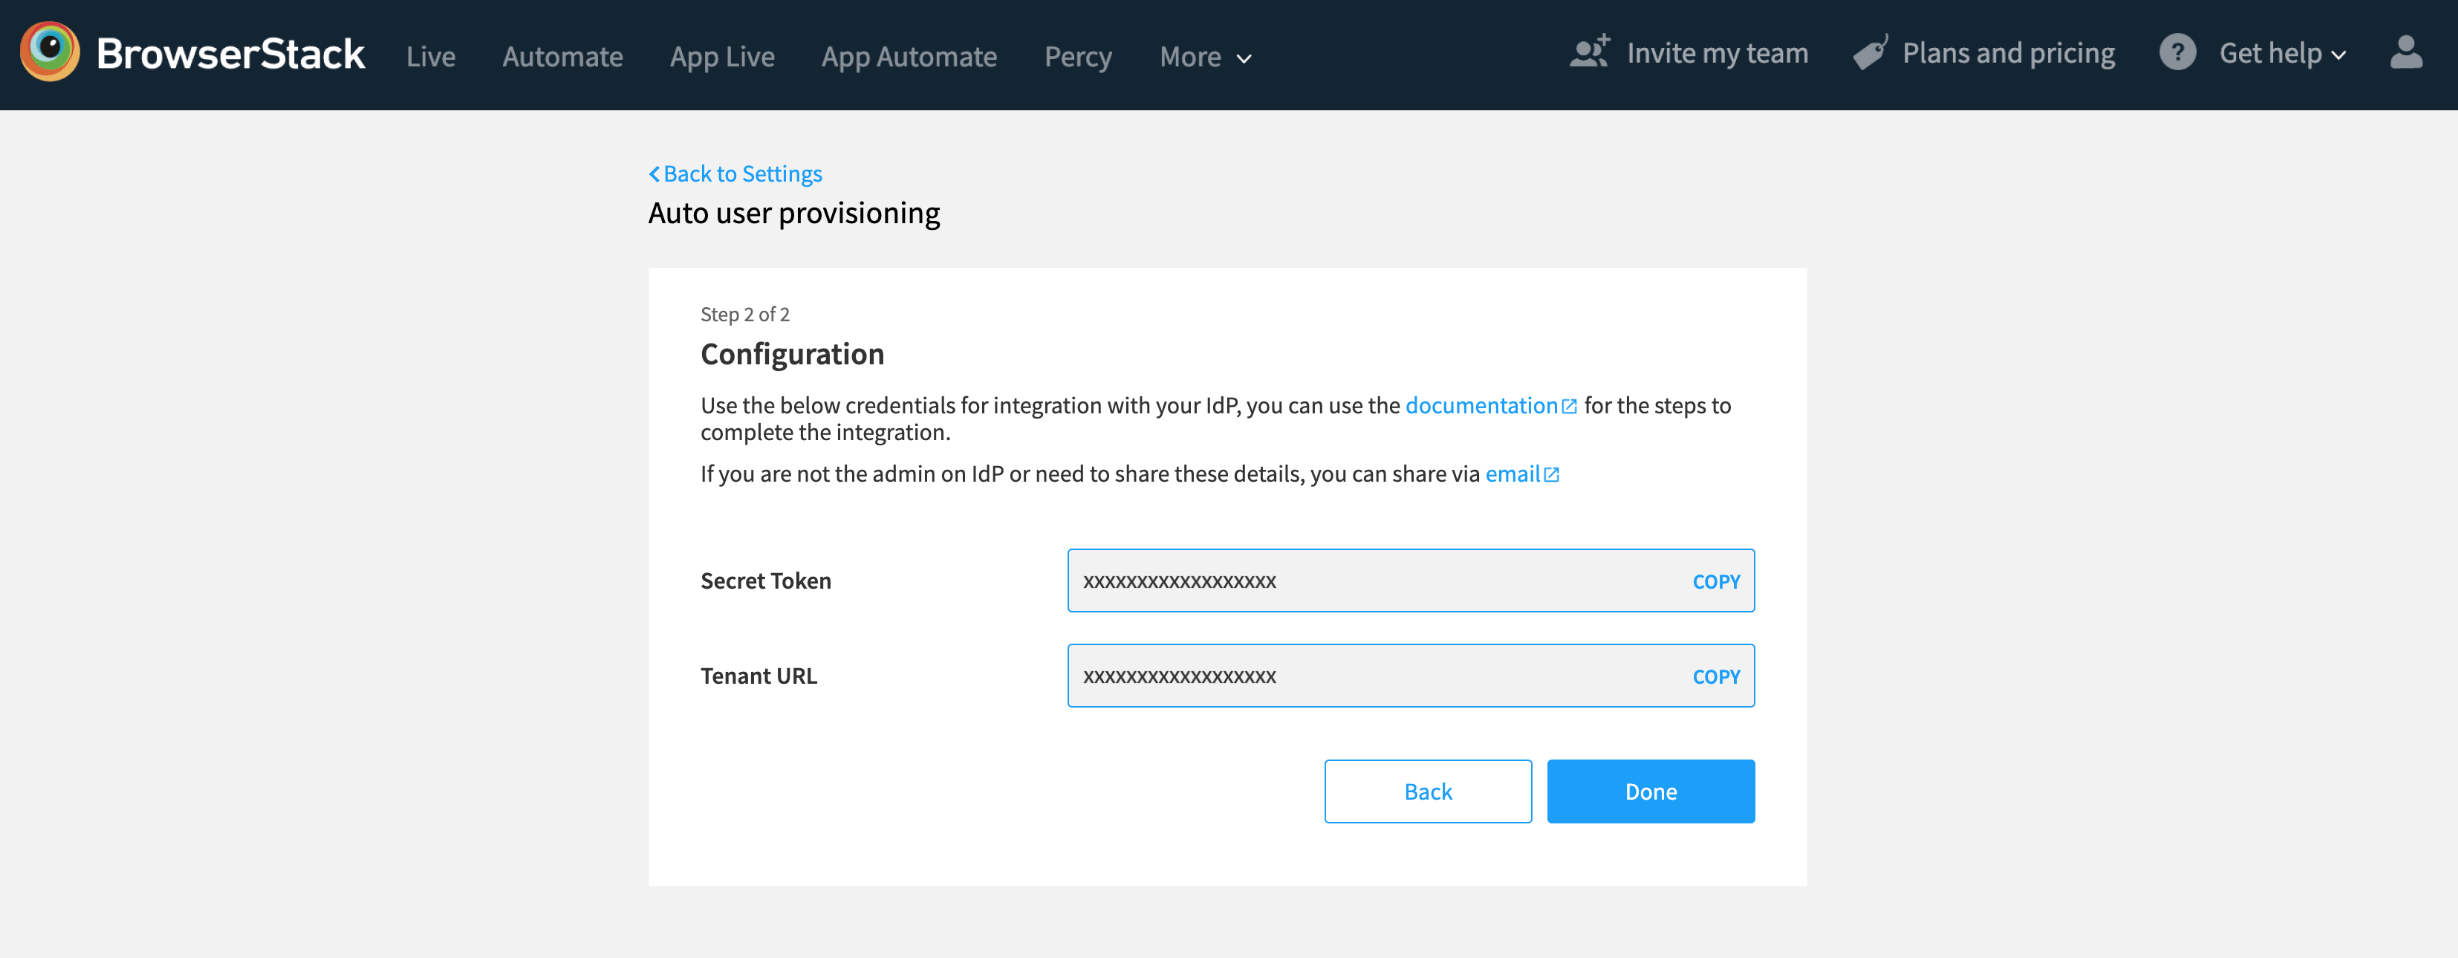 Provisioning tab of your BrowserStack application in the Azure portal